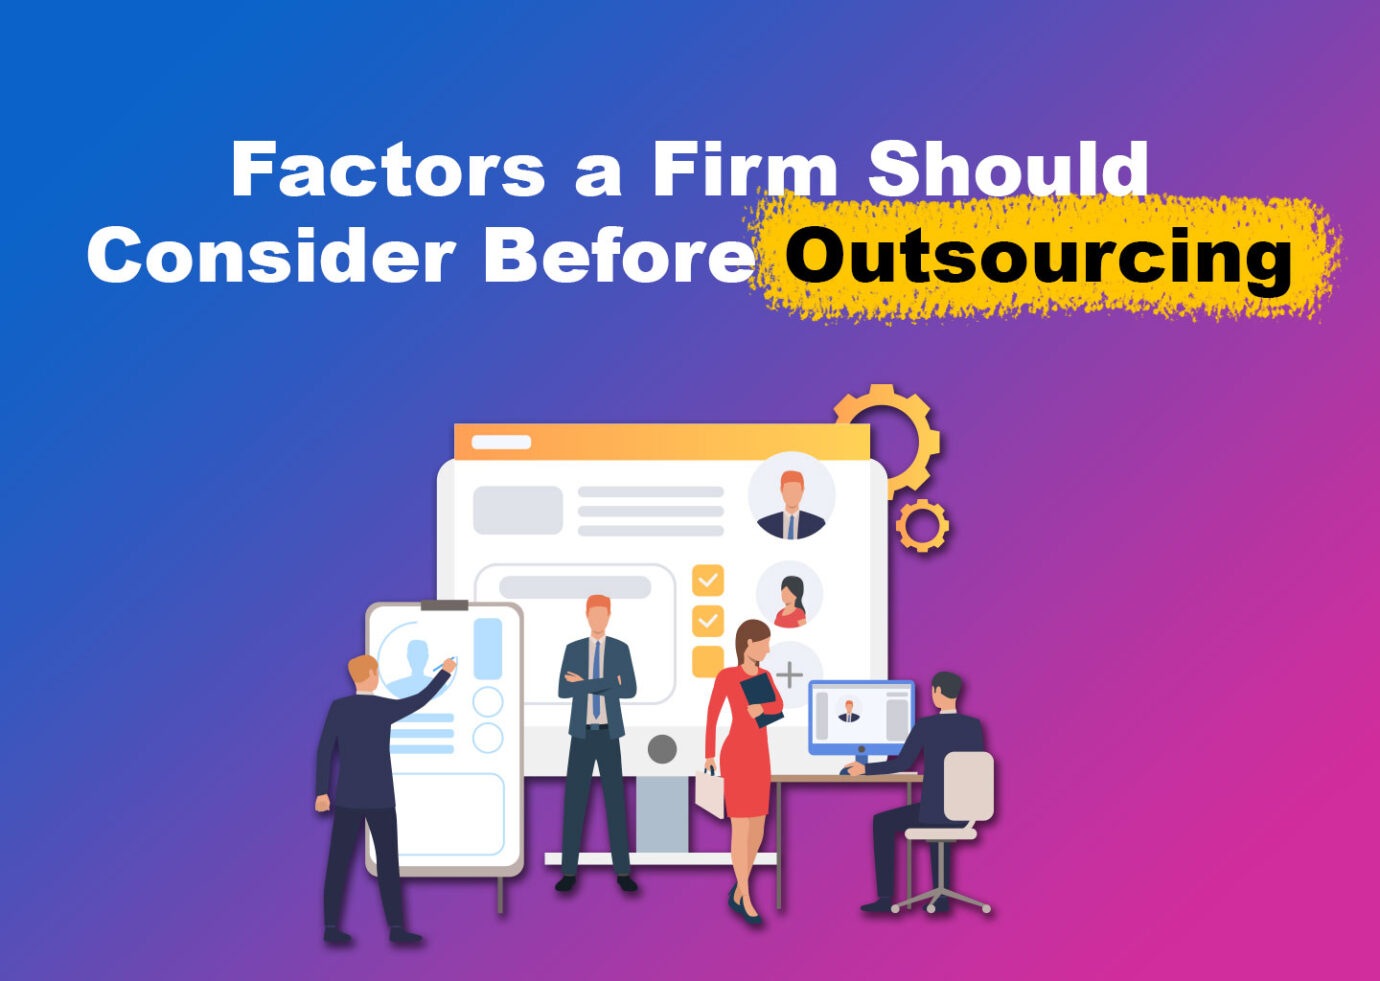 Factors a Firm Should Consider Before Outsourcing